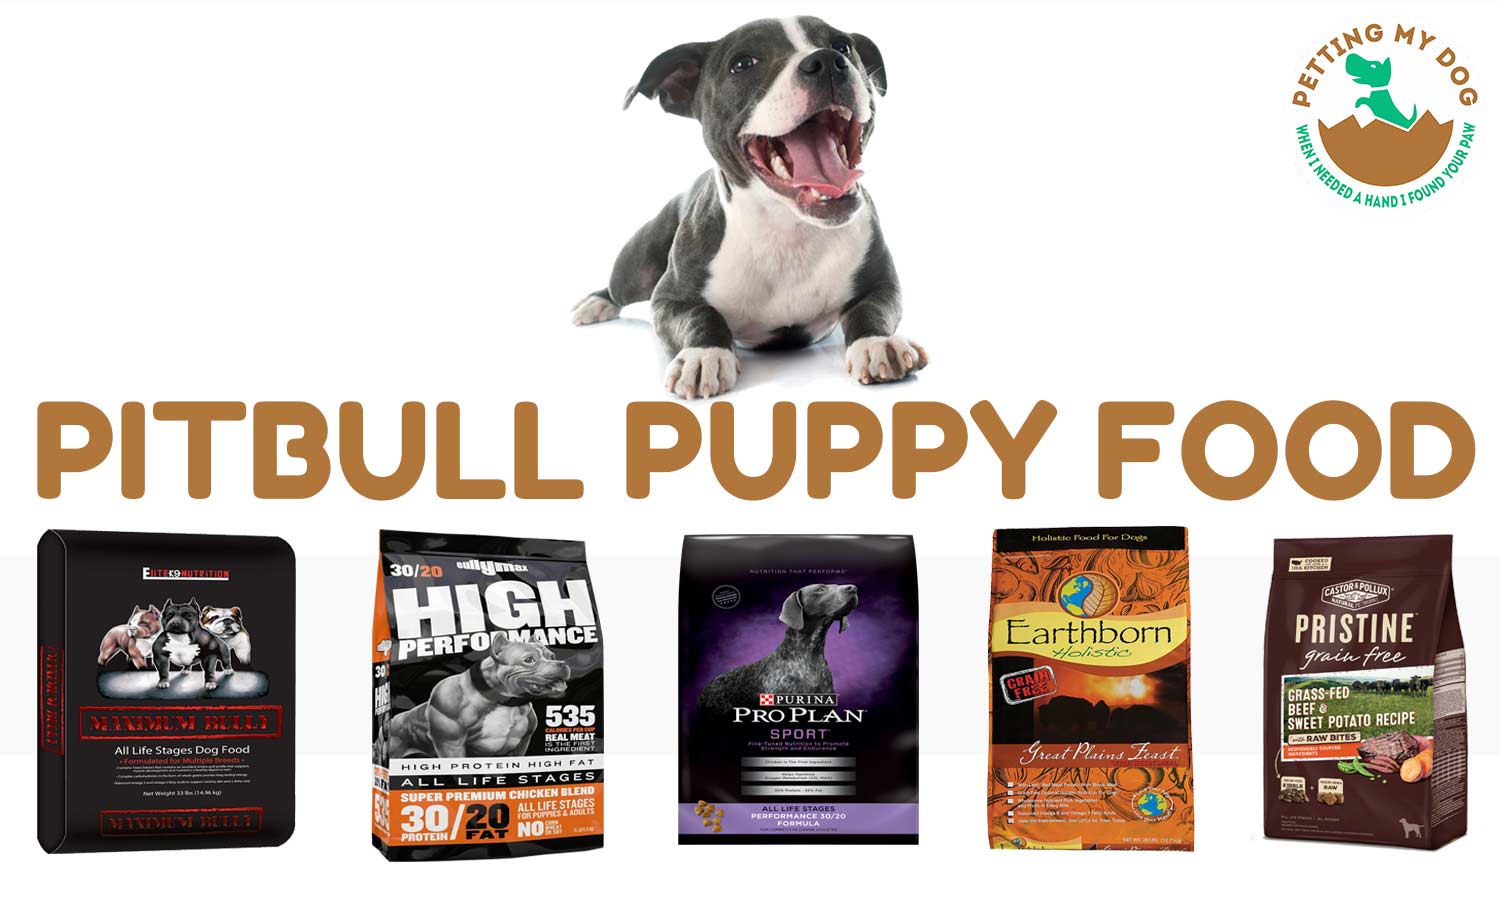 select the Best dog food for Pitbull puppy to gain weight and muscle